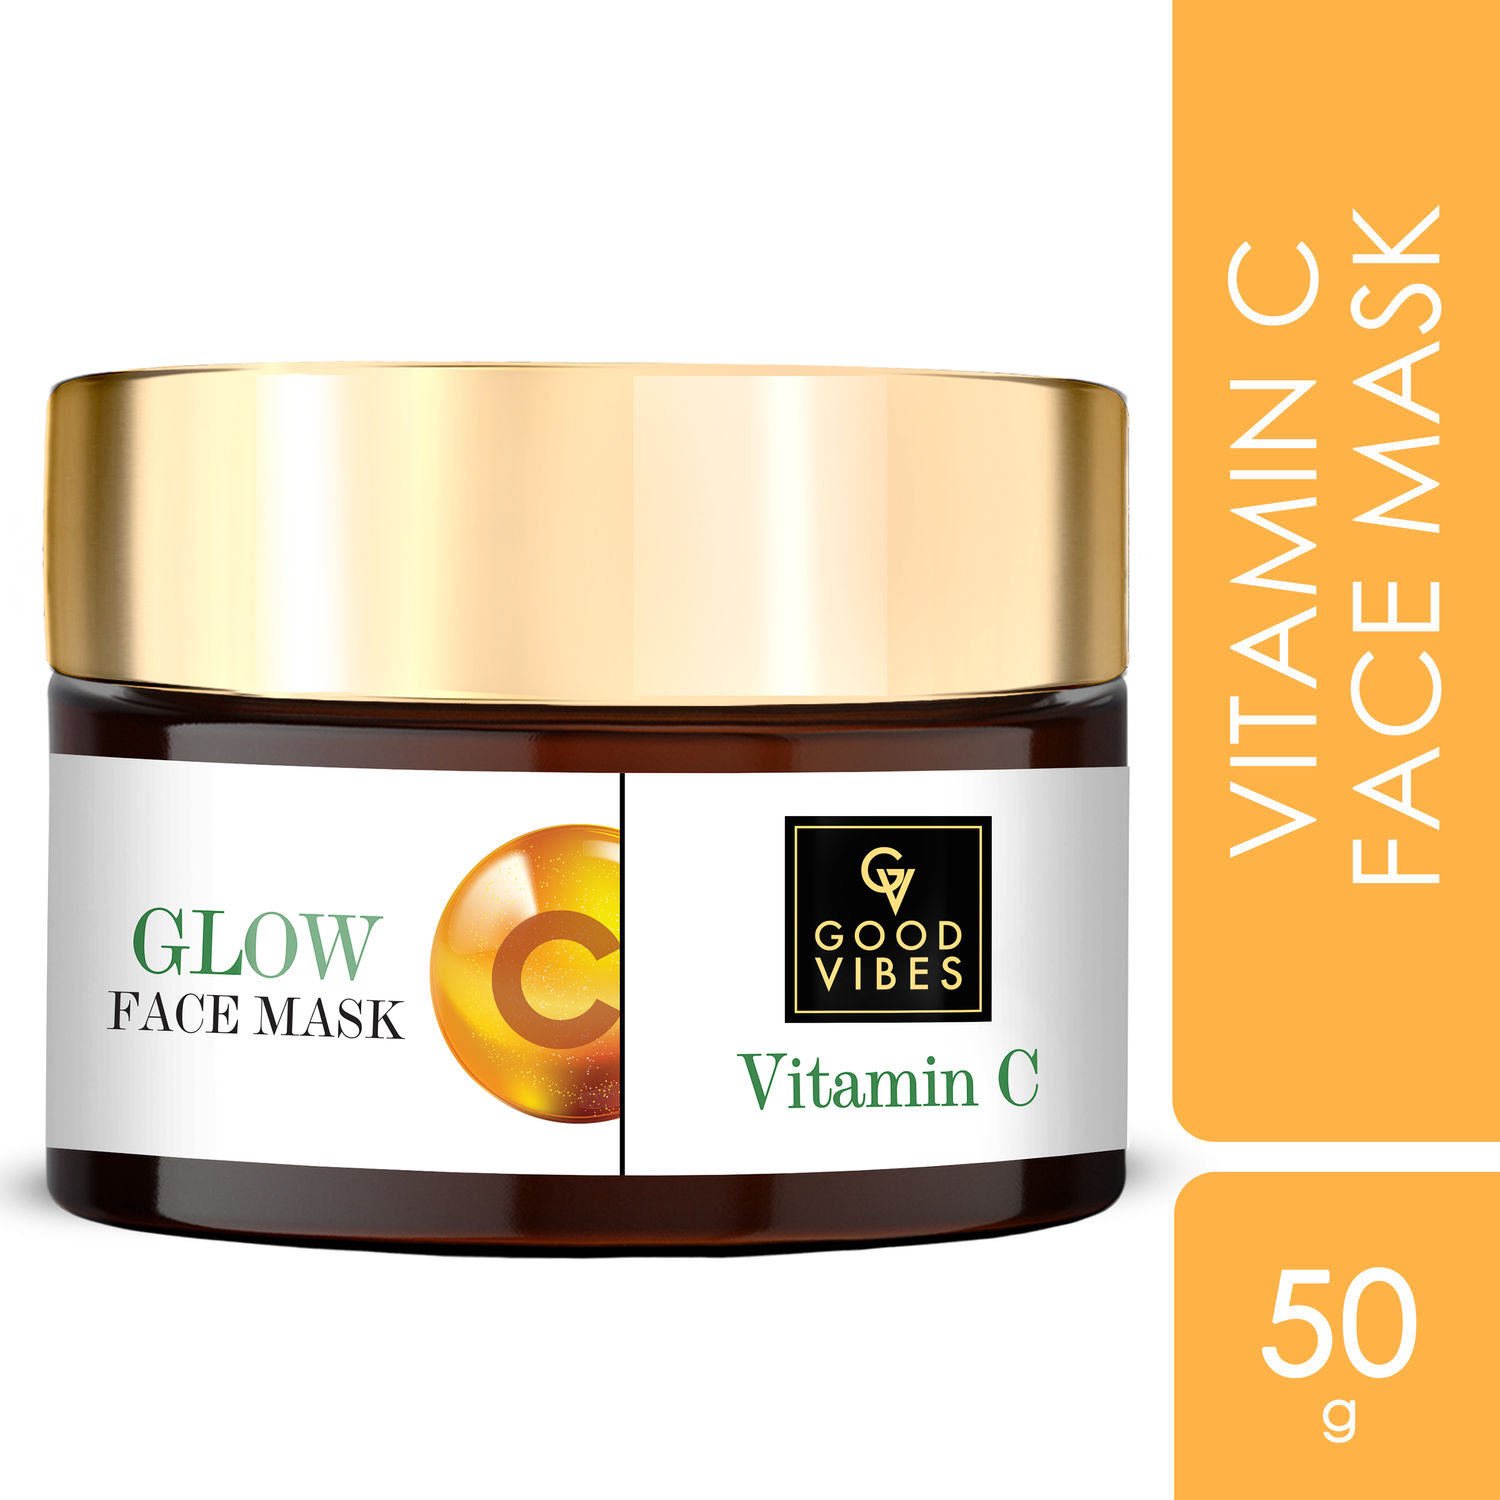 Good Vibes Vitamin C Glow Face Mask | Hydrating, Softening, Cleansing| No Parabens, No Sulphates, No Mineral Oil, No Animal Testing (50 gm)